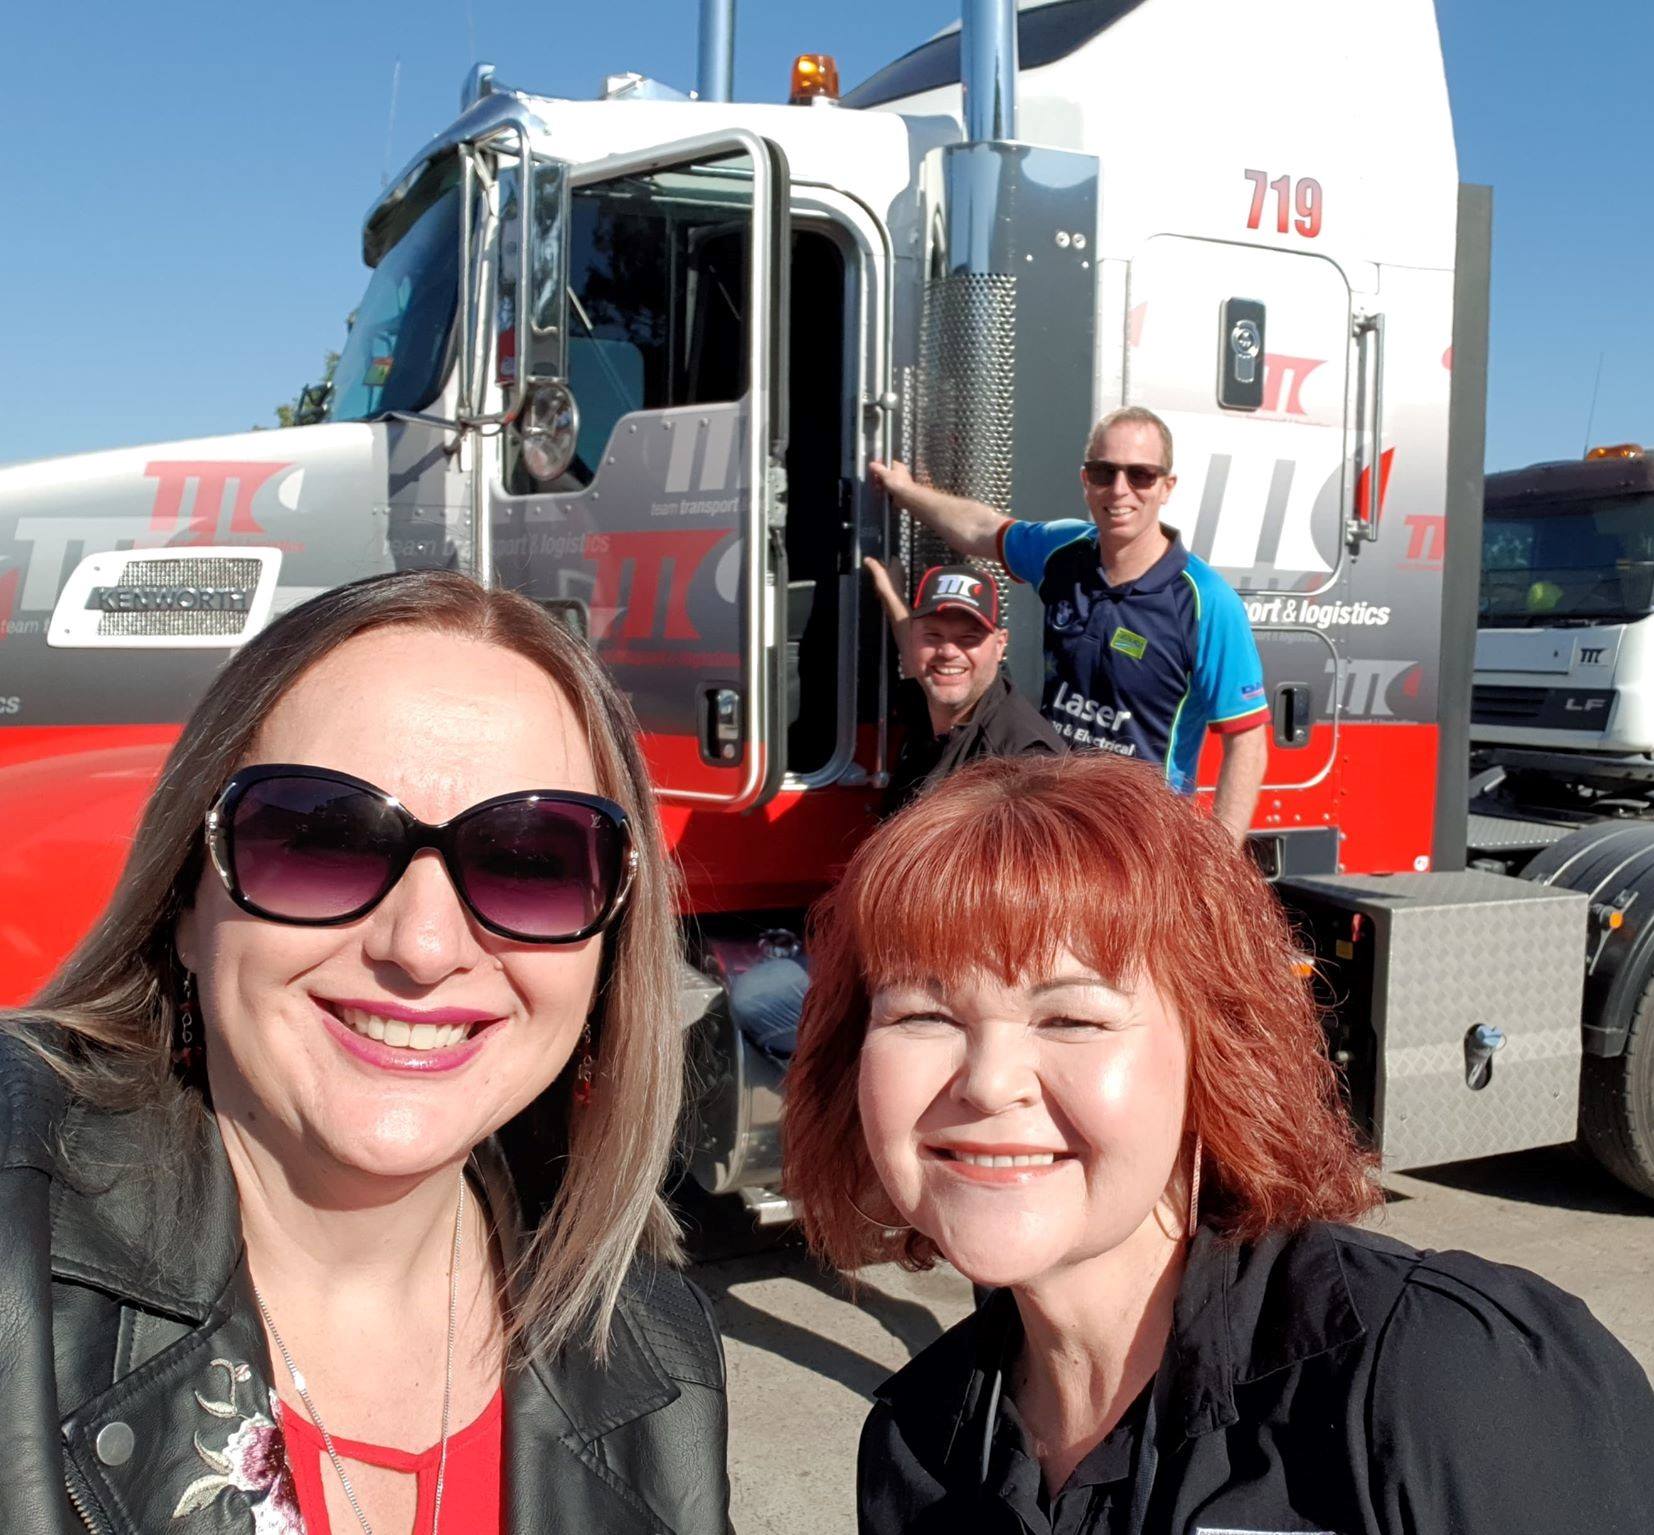 "Steve Richards" at Team Transport & Logistics clicking a selfie with members while on truck